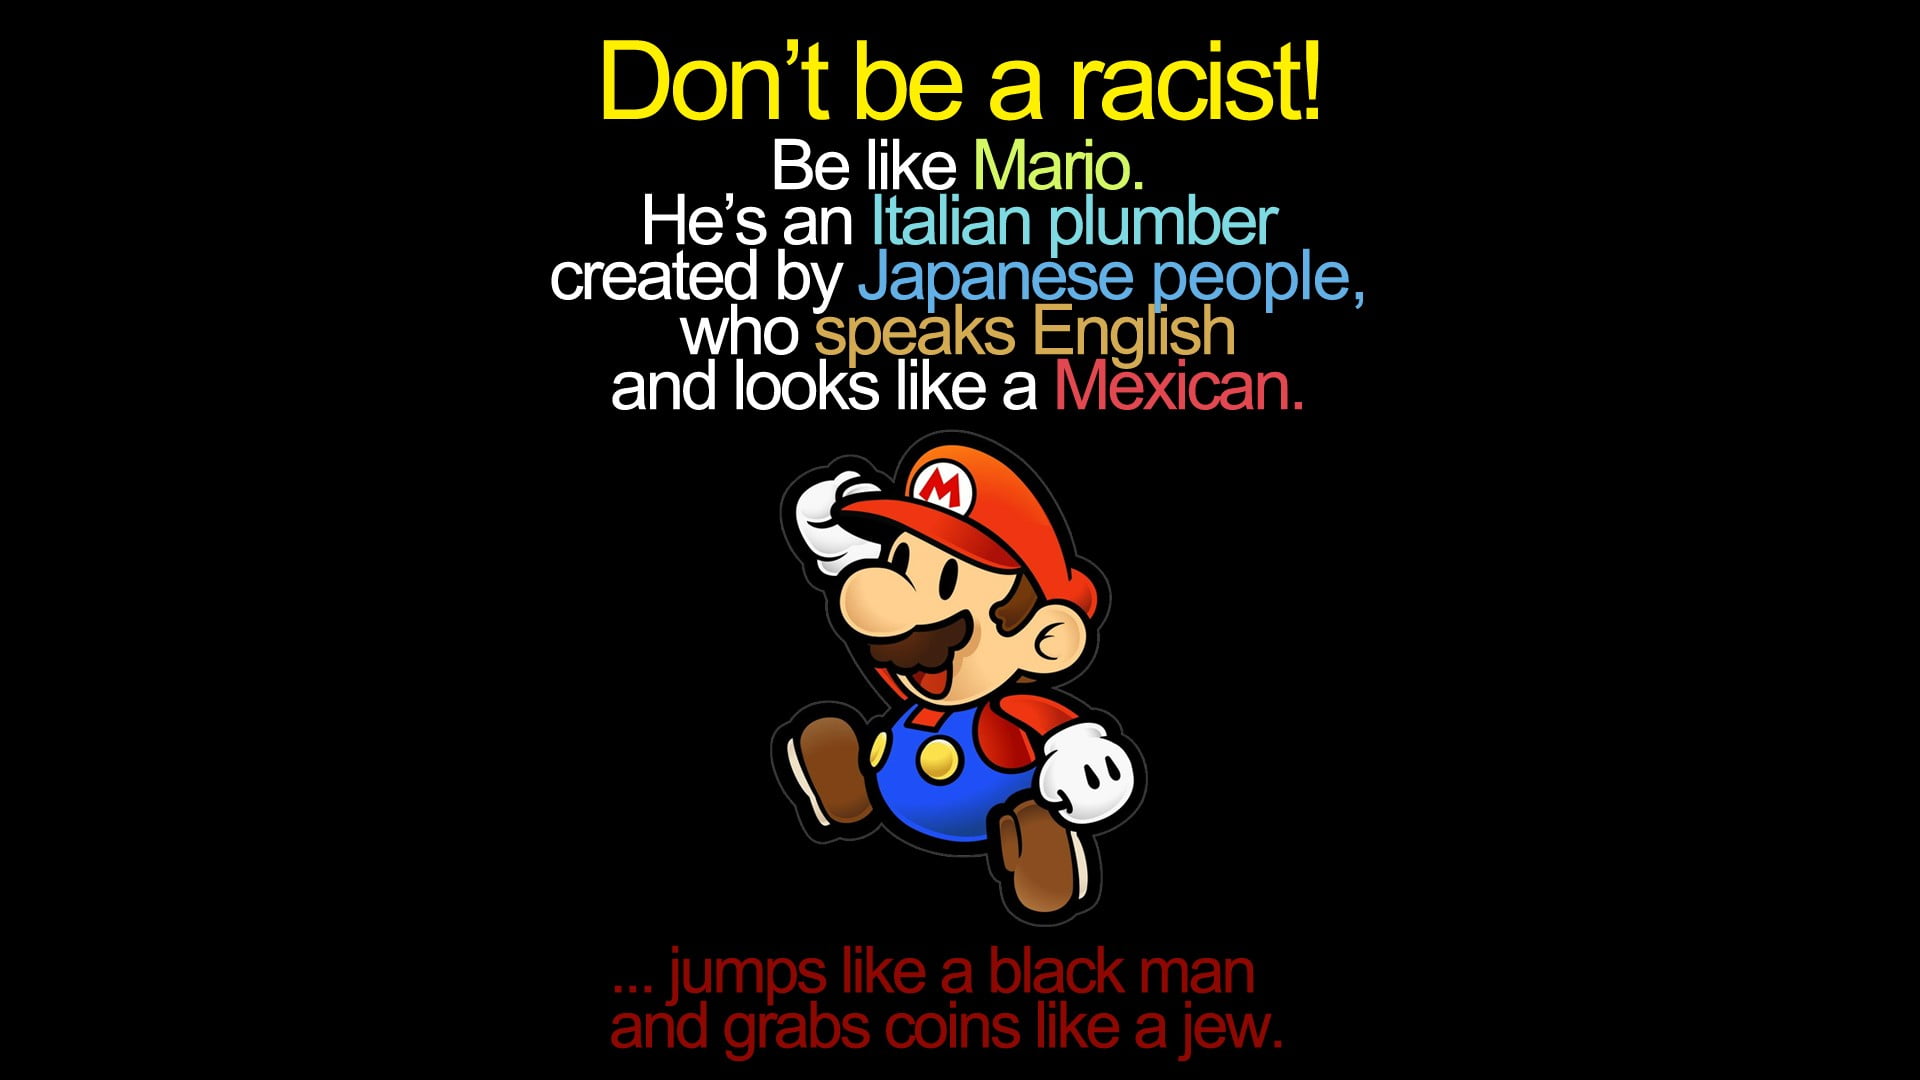 Don't be racist! Super Mario advertisement